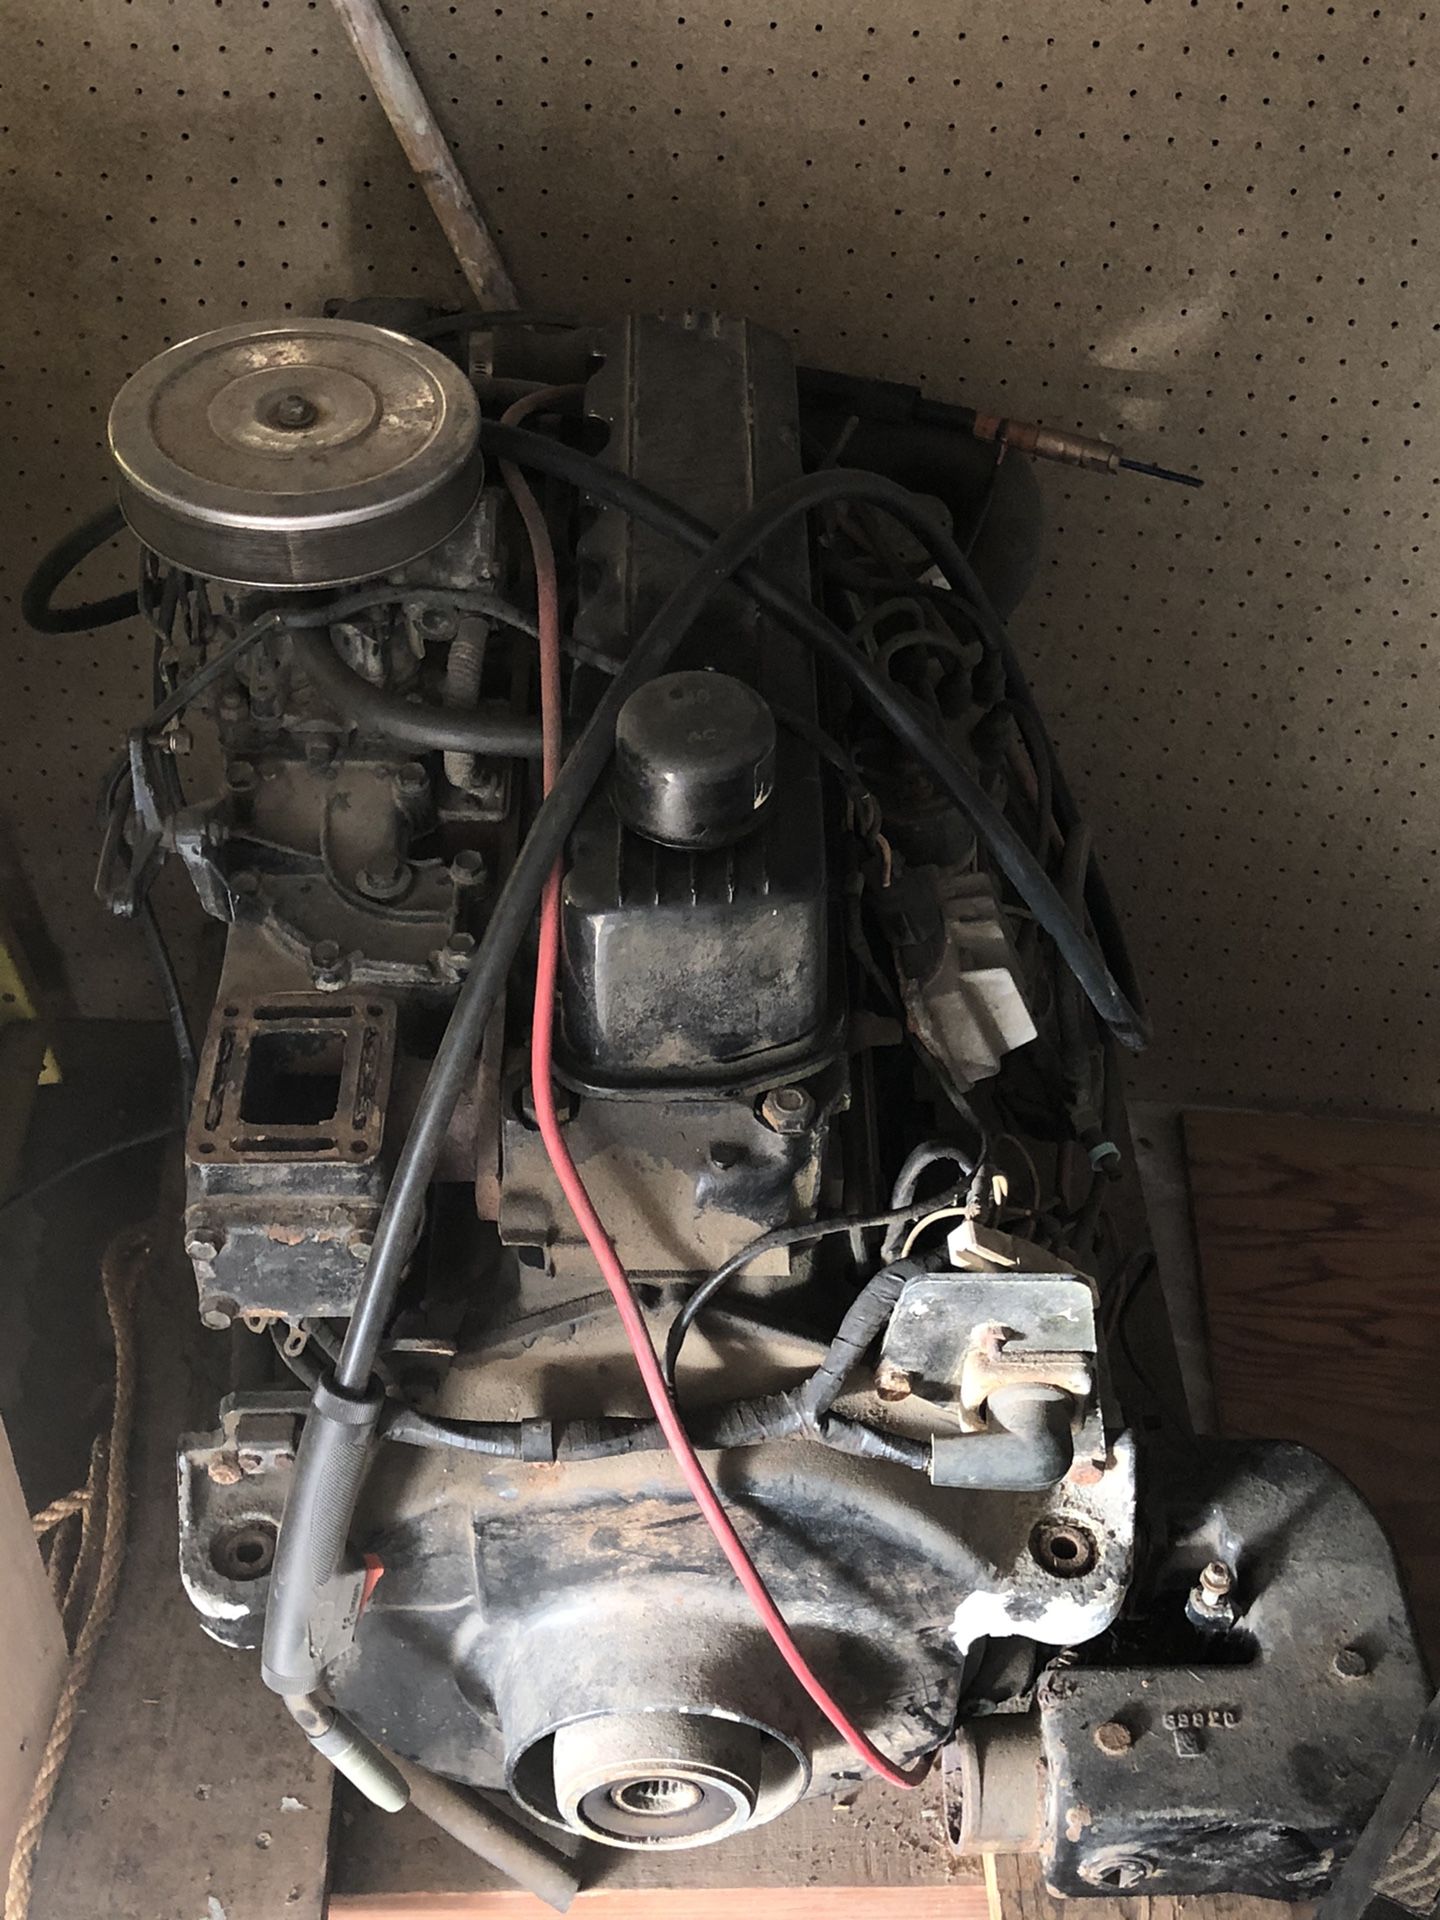 120hp boat engine with other parts taking first reasonable offer condition unknown.